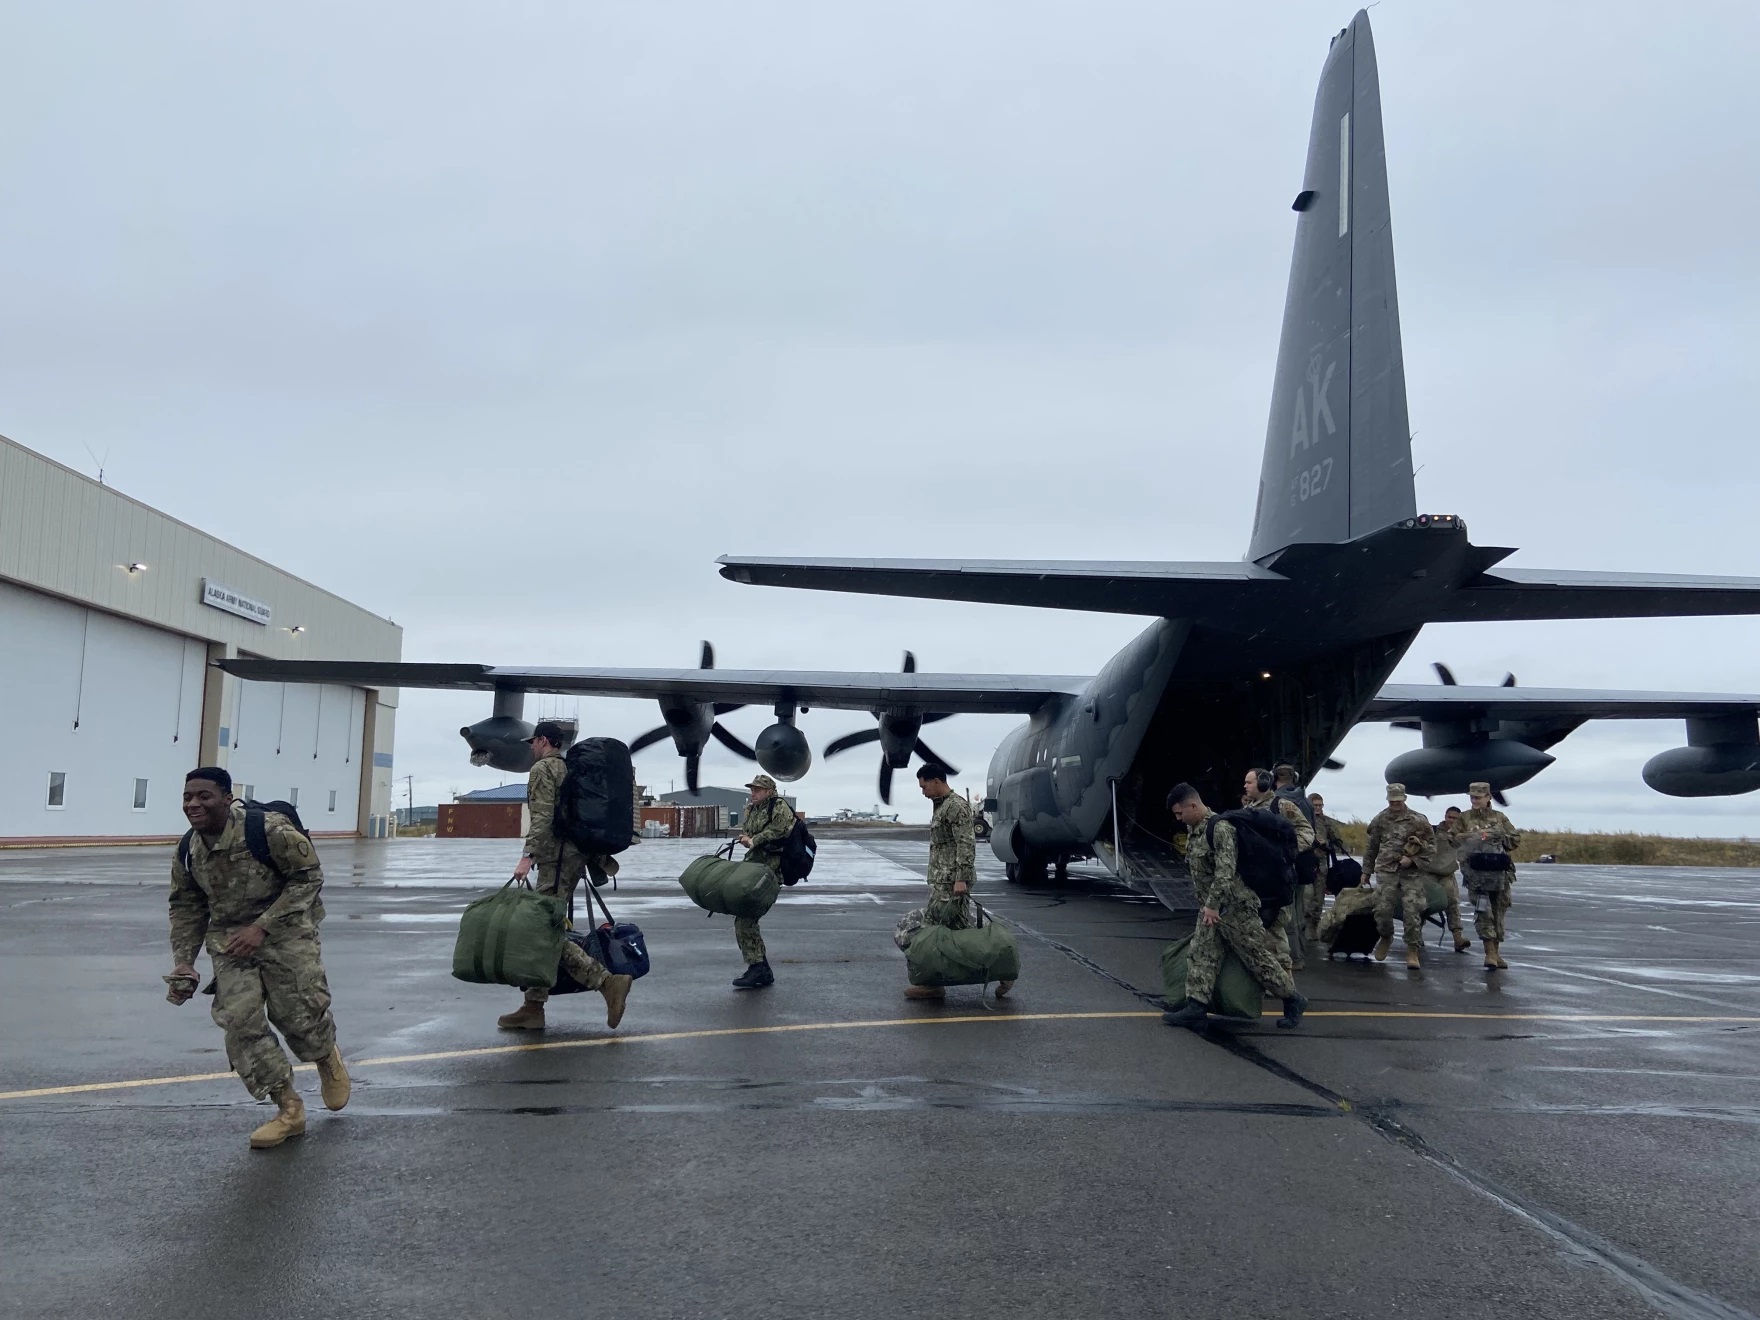 soldiers exiting a transport plane